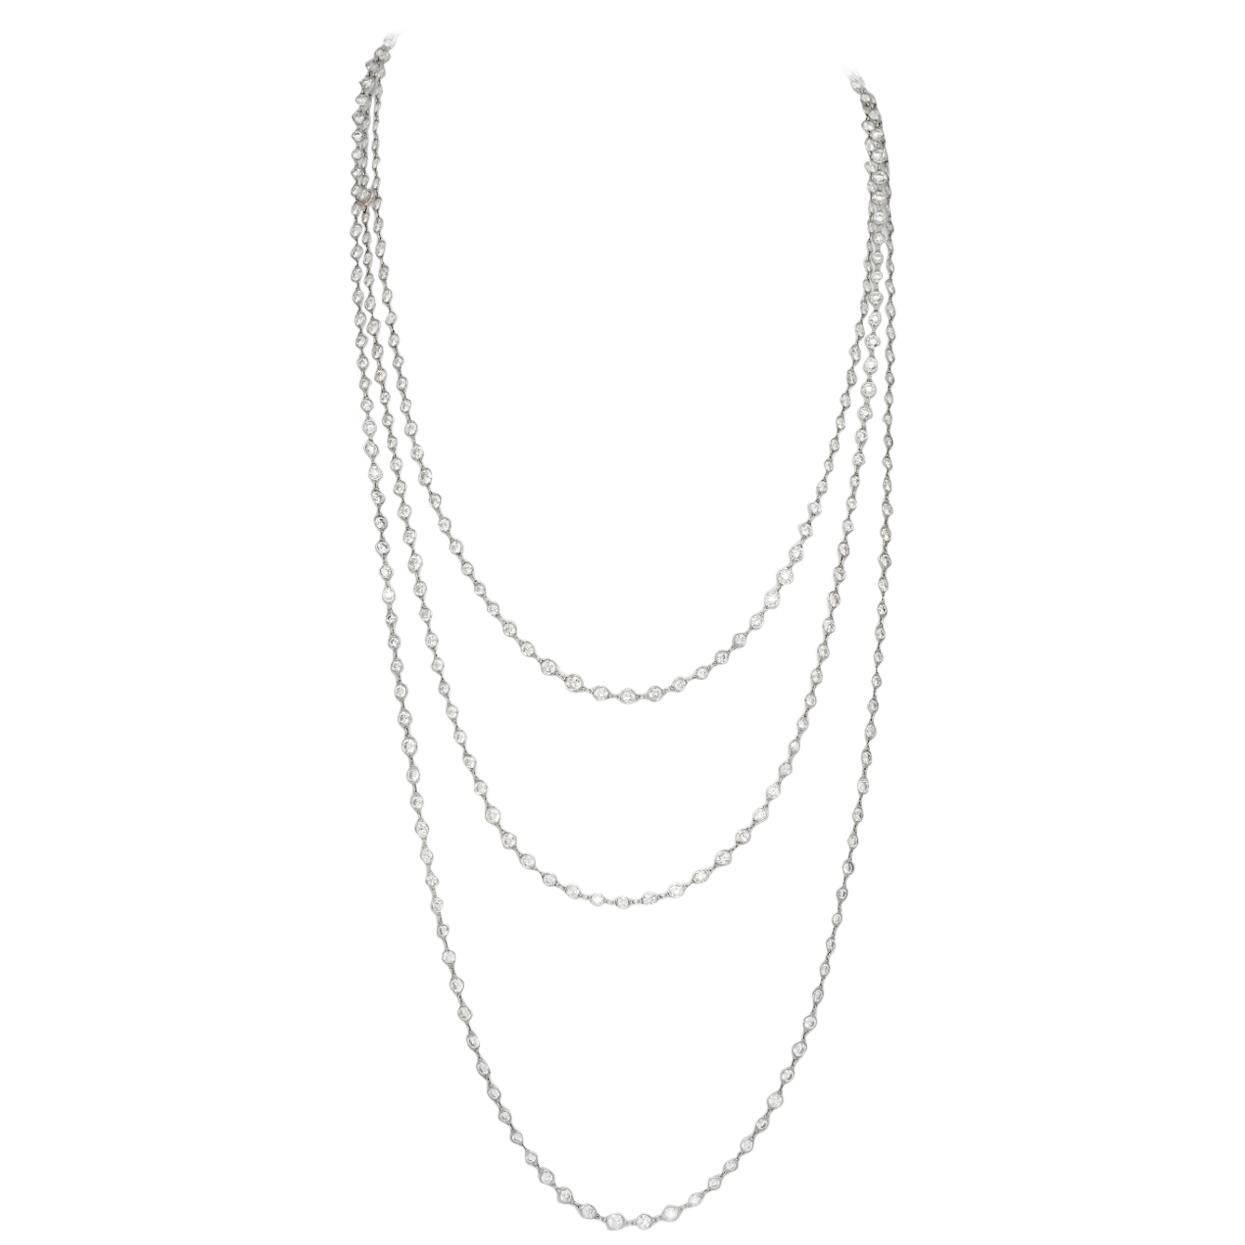 This Stephen Russell Diamond and Platinum Chain is set with 324 Round Diamonds with a total weight of 76.15 ct; The length is 102”. The focal point of this chain, beyond the beauty, is its versatility . The round brilliant cut diamonds of F - G